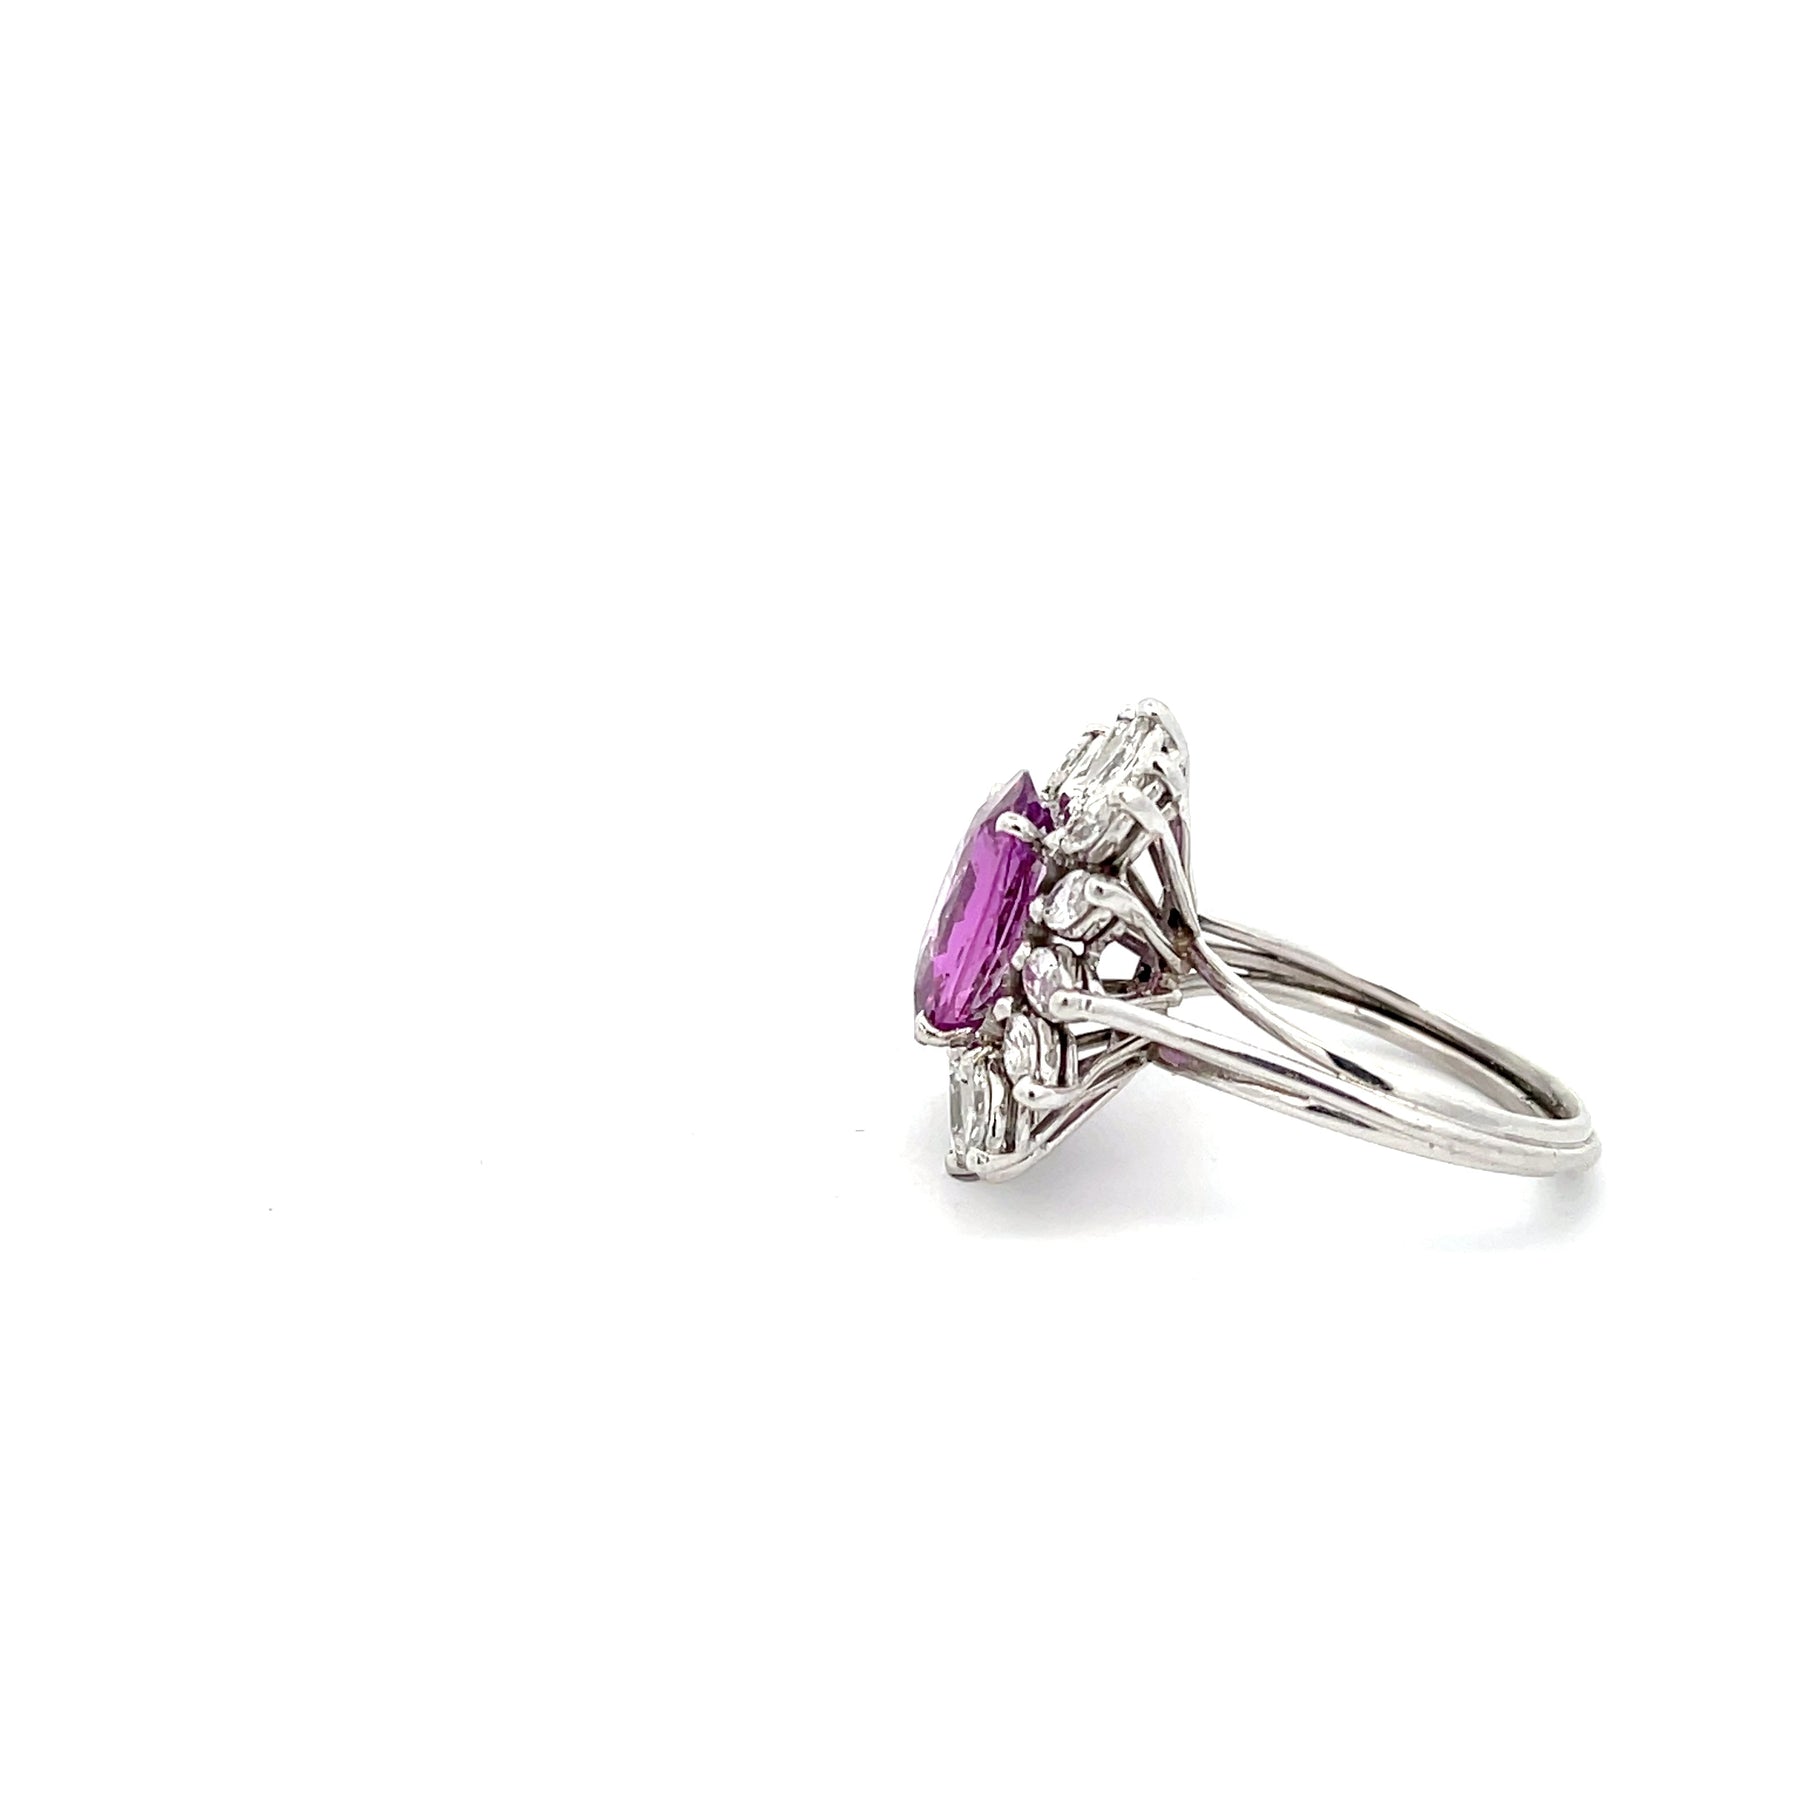 Sophisticated 4.12 CTW Pink Sapphire and Diamond Ring in Platinum